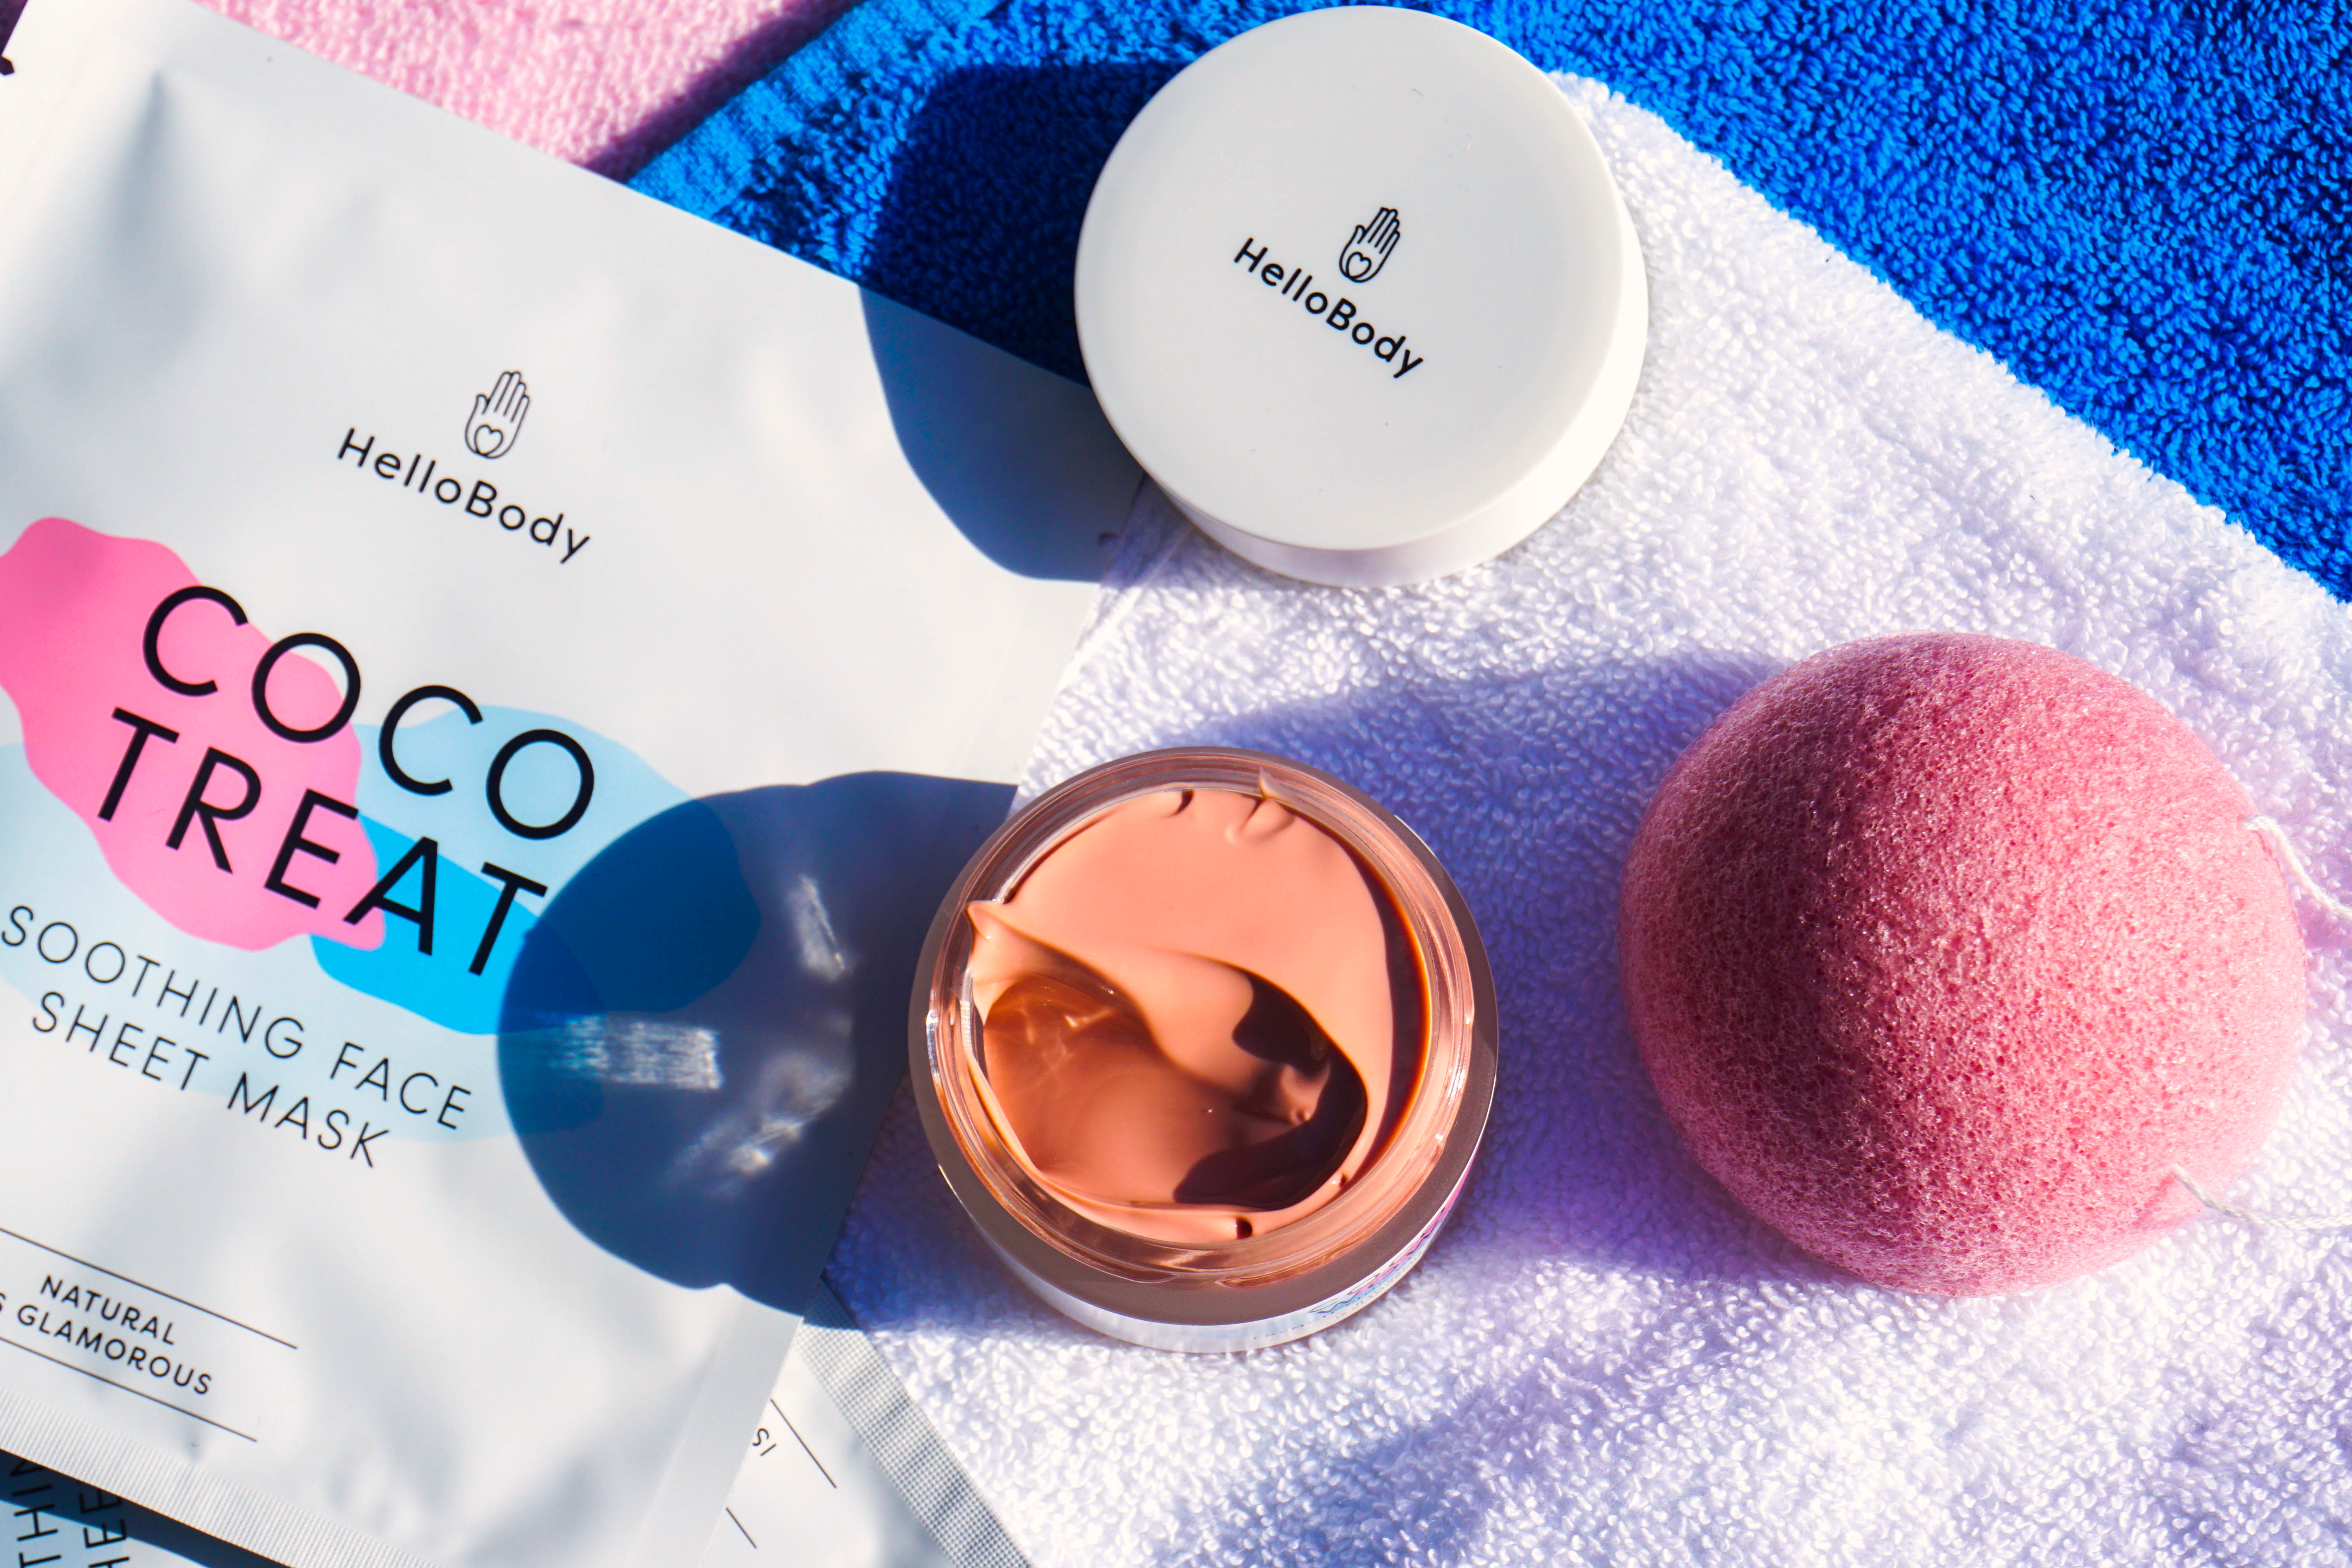 HELLOBODY Coco Treat Soothing Face Sheet Mask & Coco Wow French Pink Clay Mask & Konjac Cleansing Sponge - Highendlove